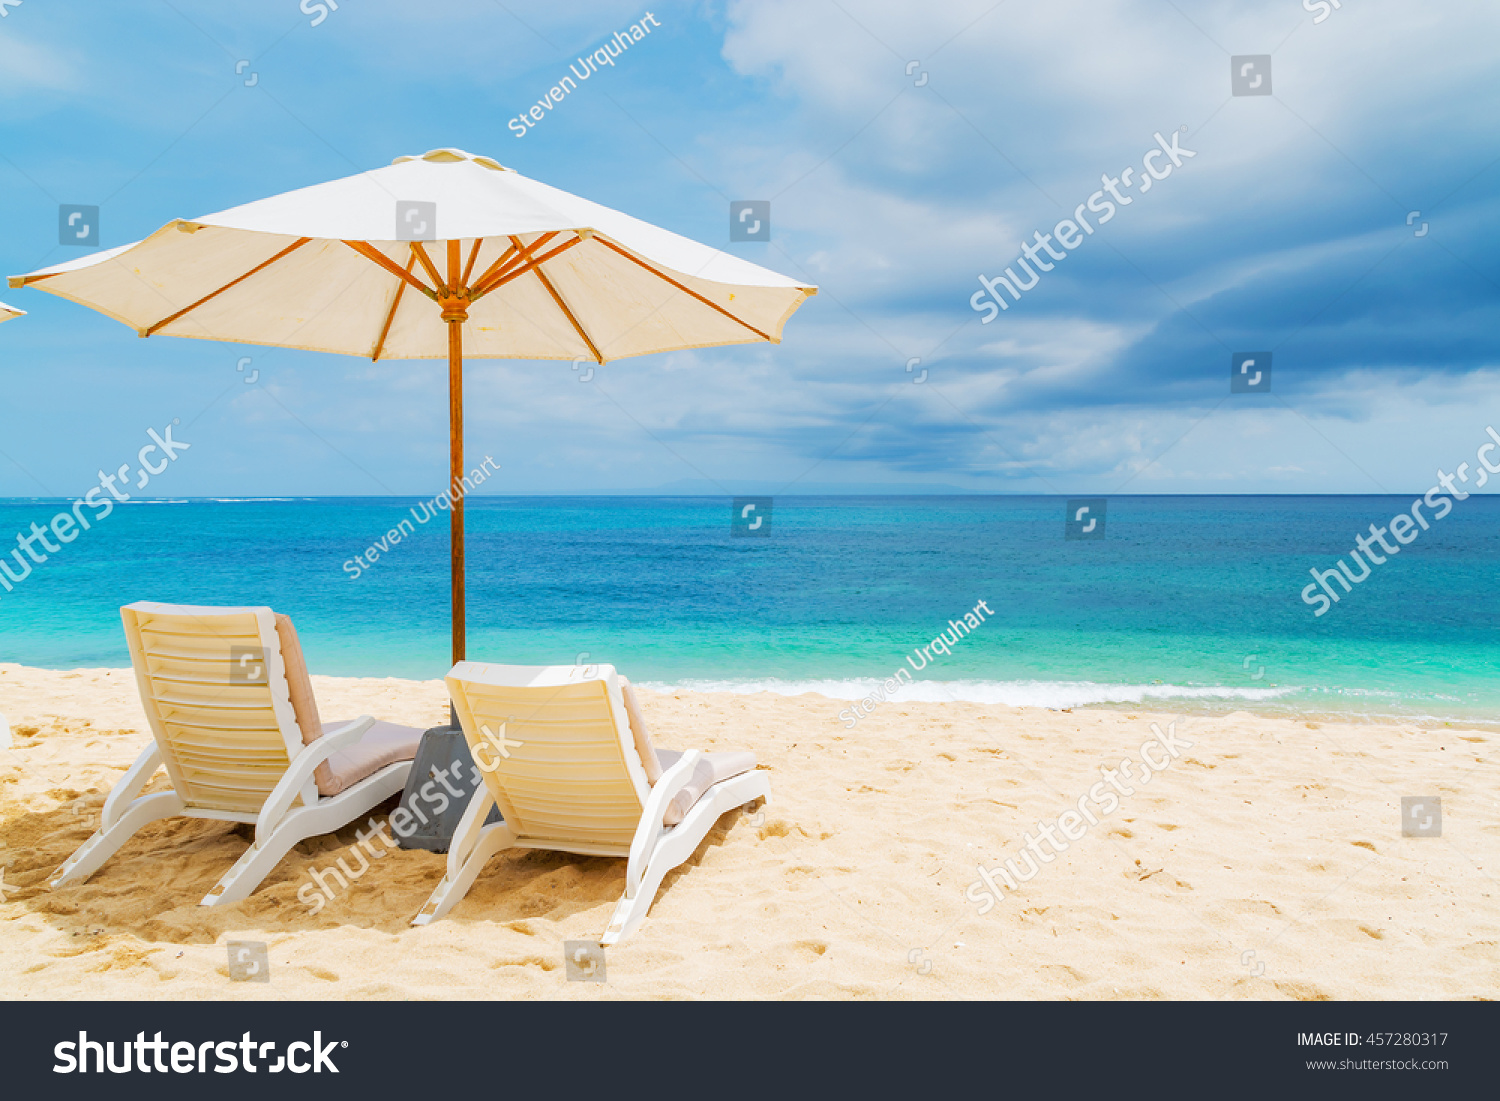 Sunshade and outdoor lounger at a tropical resort in Asia #457280317